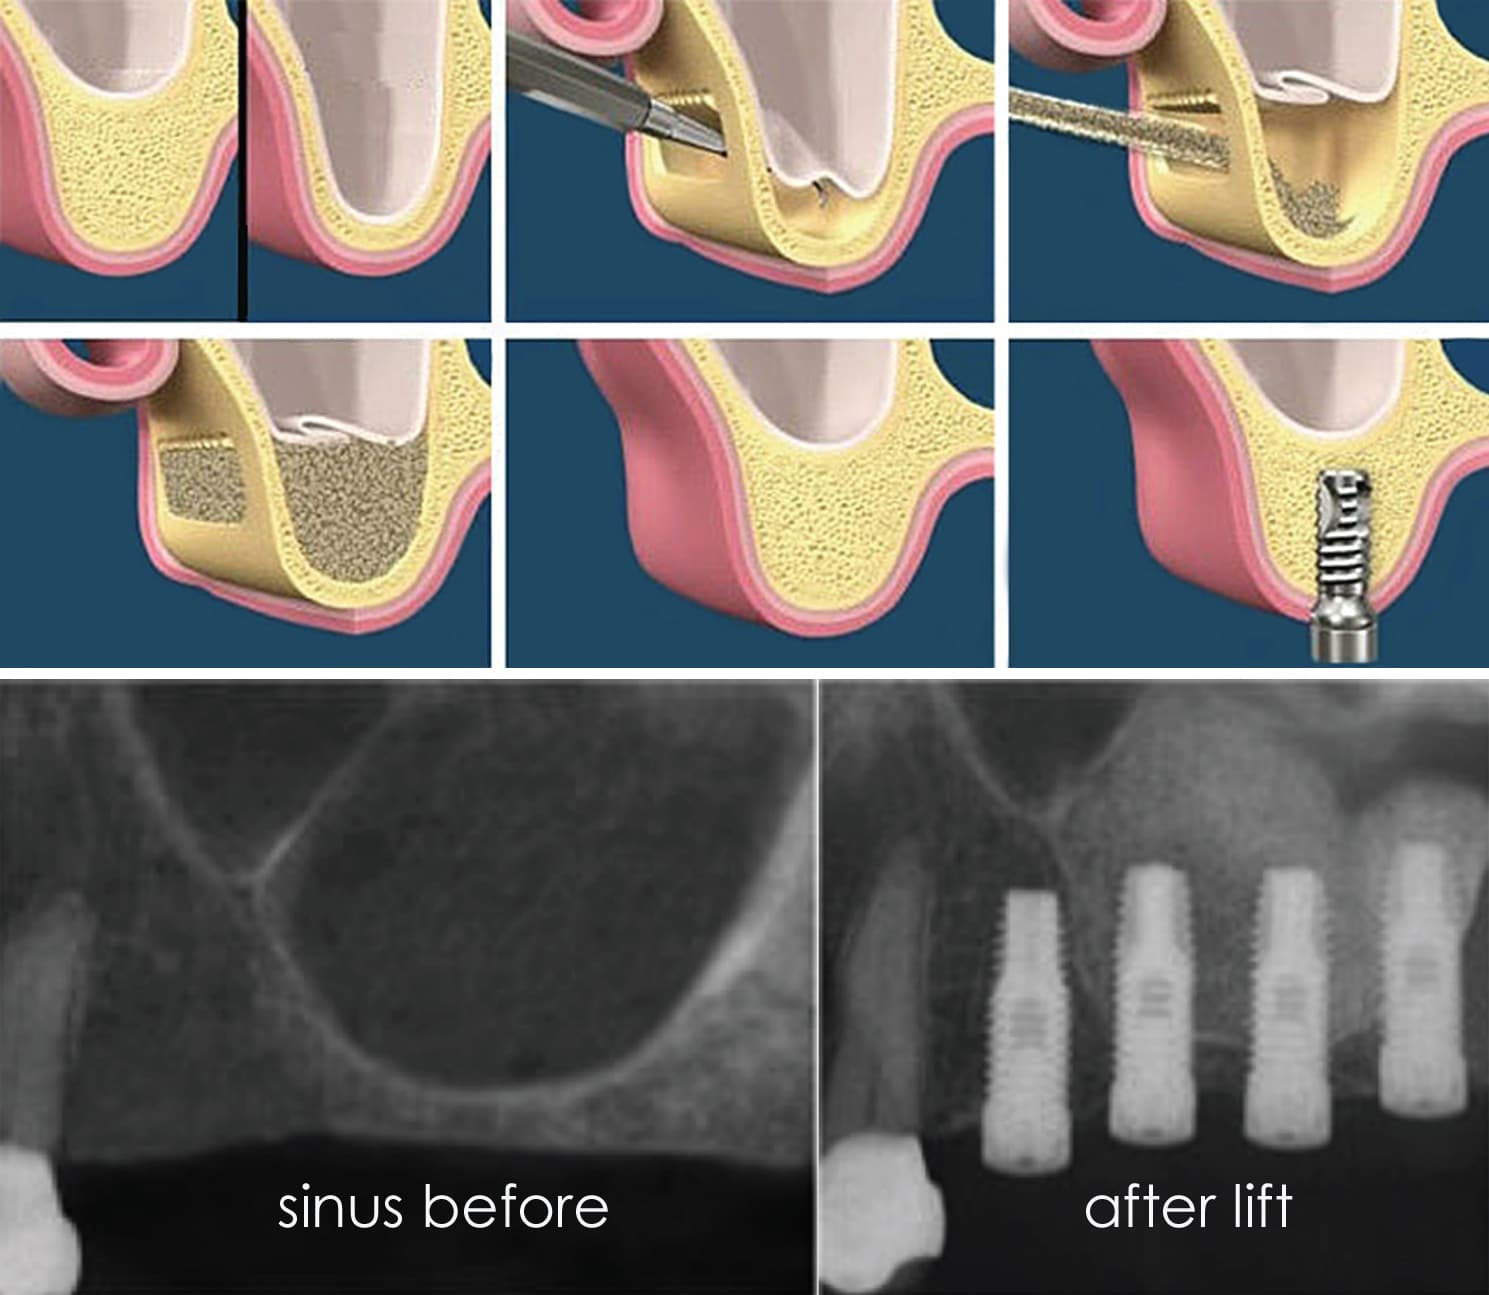 Sinus Lift makes implant possible for some